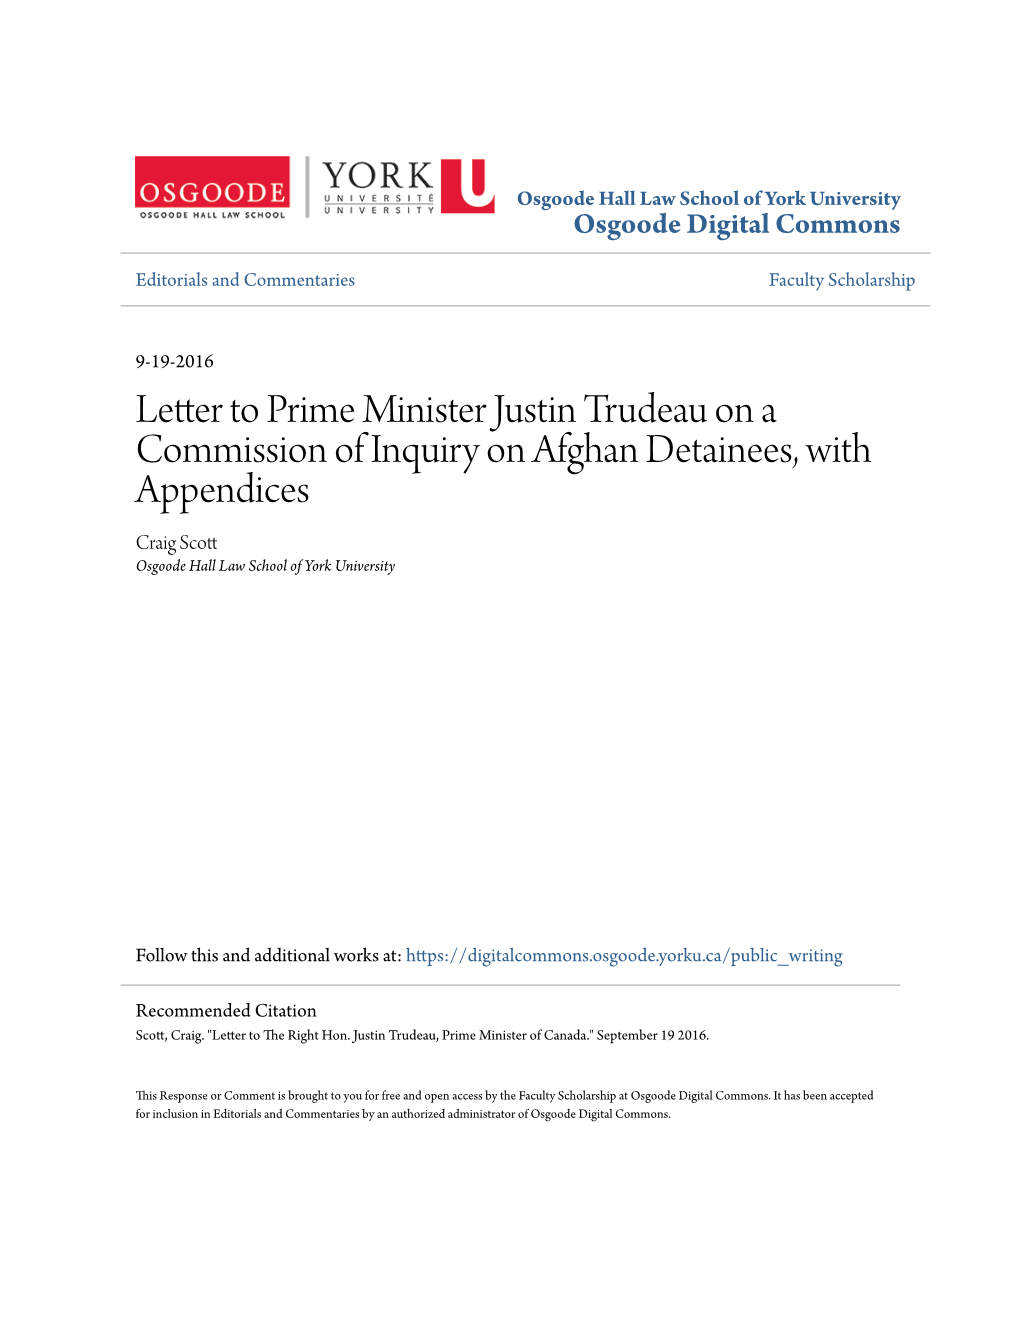 Letter to Prime Minister Justin Trudeau on a Commission of Inquiry on Afghan Detainees, with Appendices Craig Scott Osgoode Hall Law School of York University